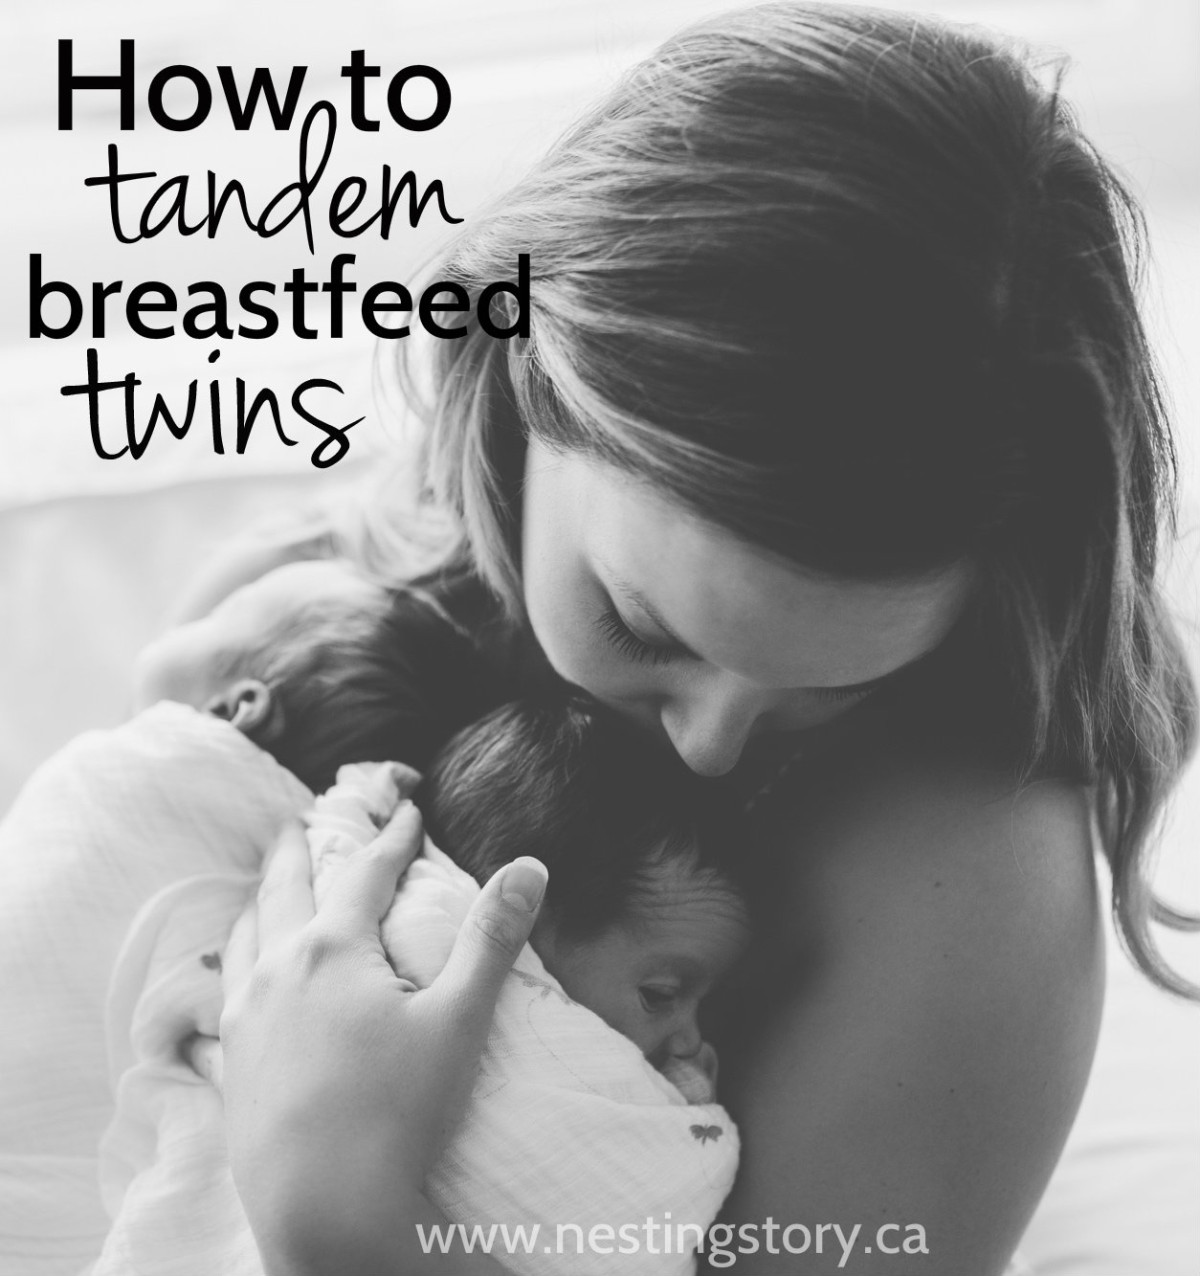 How To Tandem Breastfeed Twins